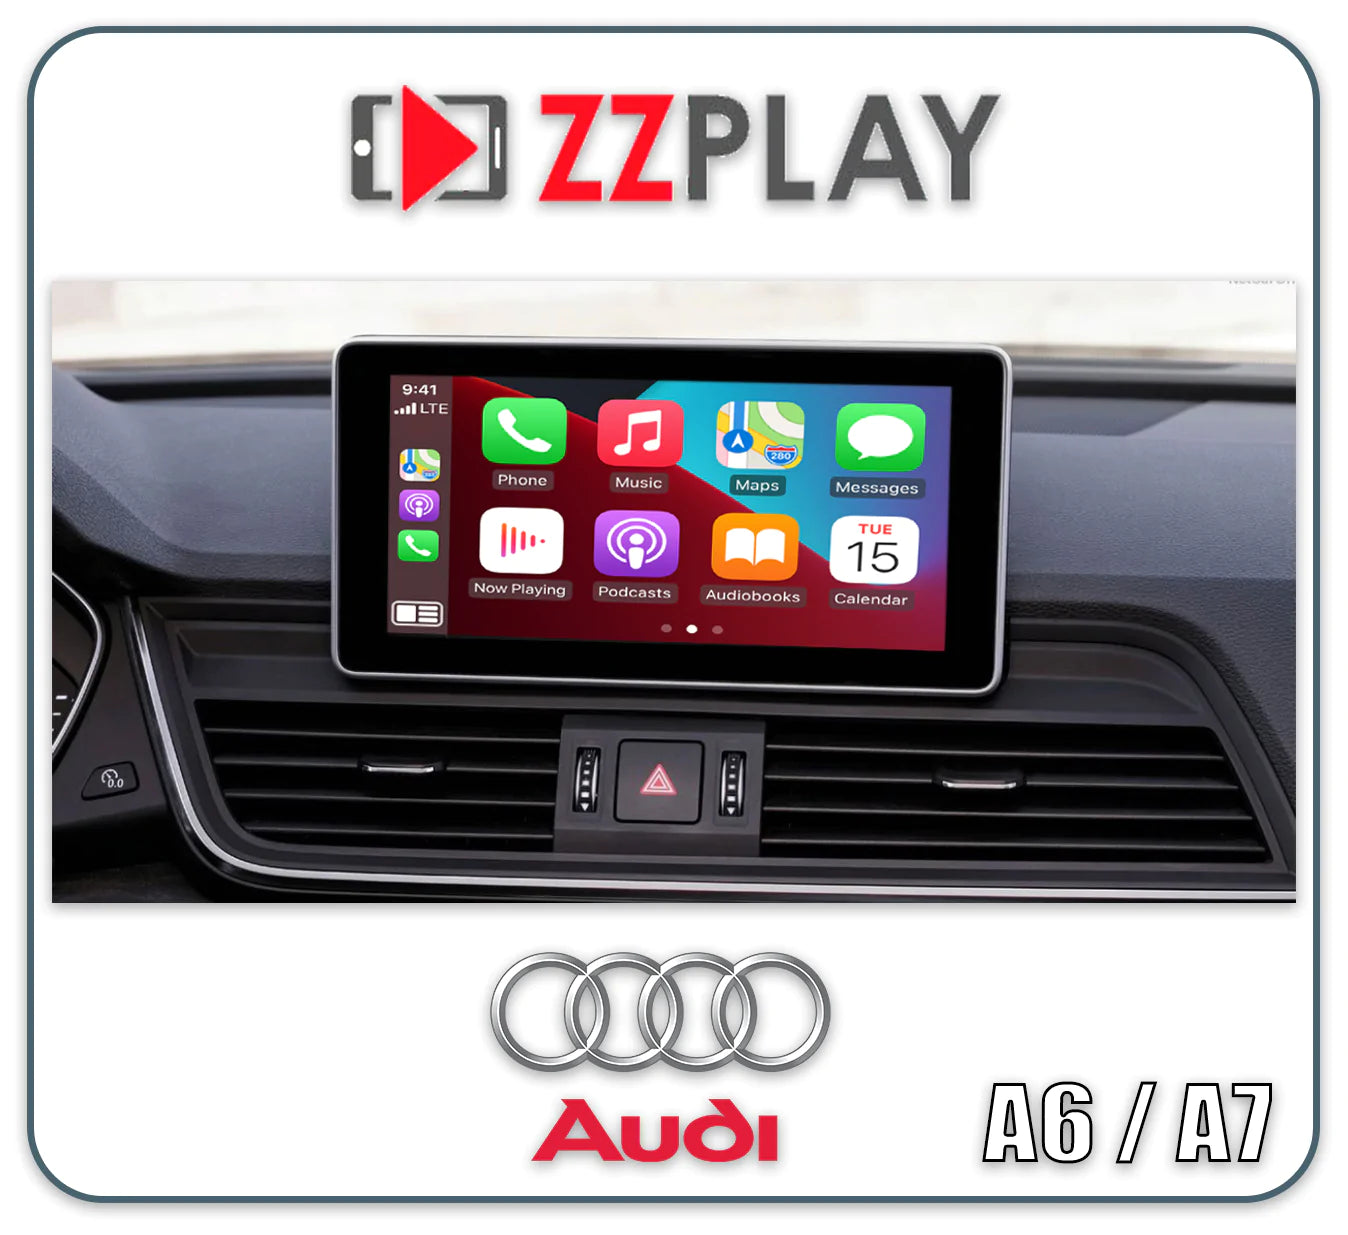 ZZ-2 IT3-MIB2-A6/A7 Wireless CarPlay and Android Auto Interface - Lockdown Security